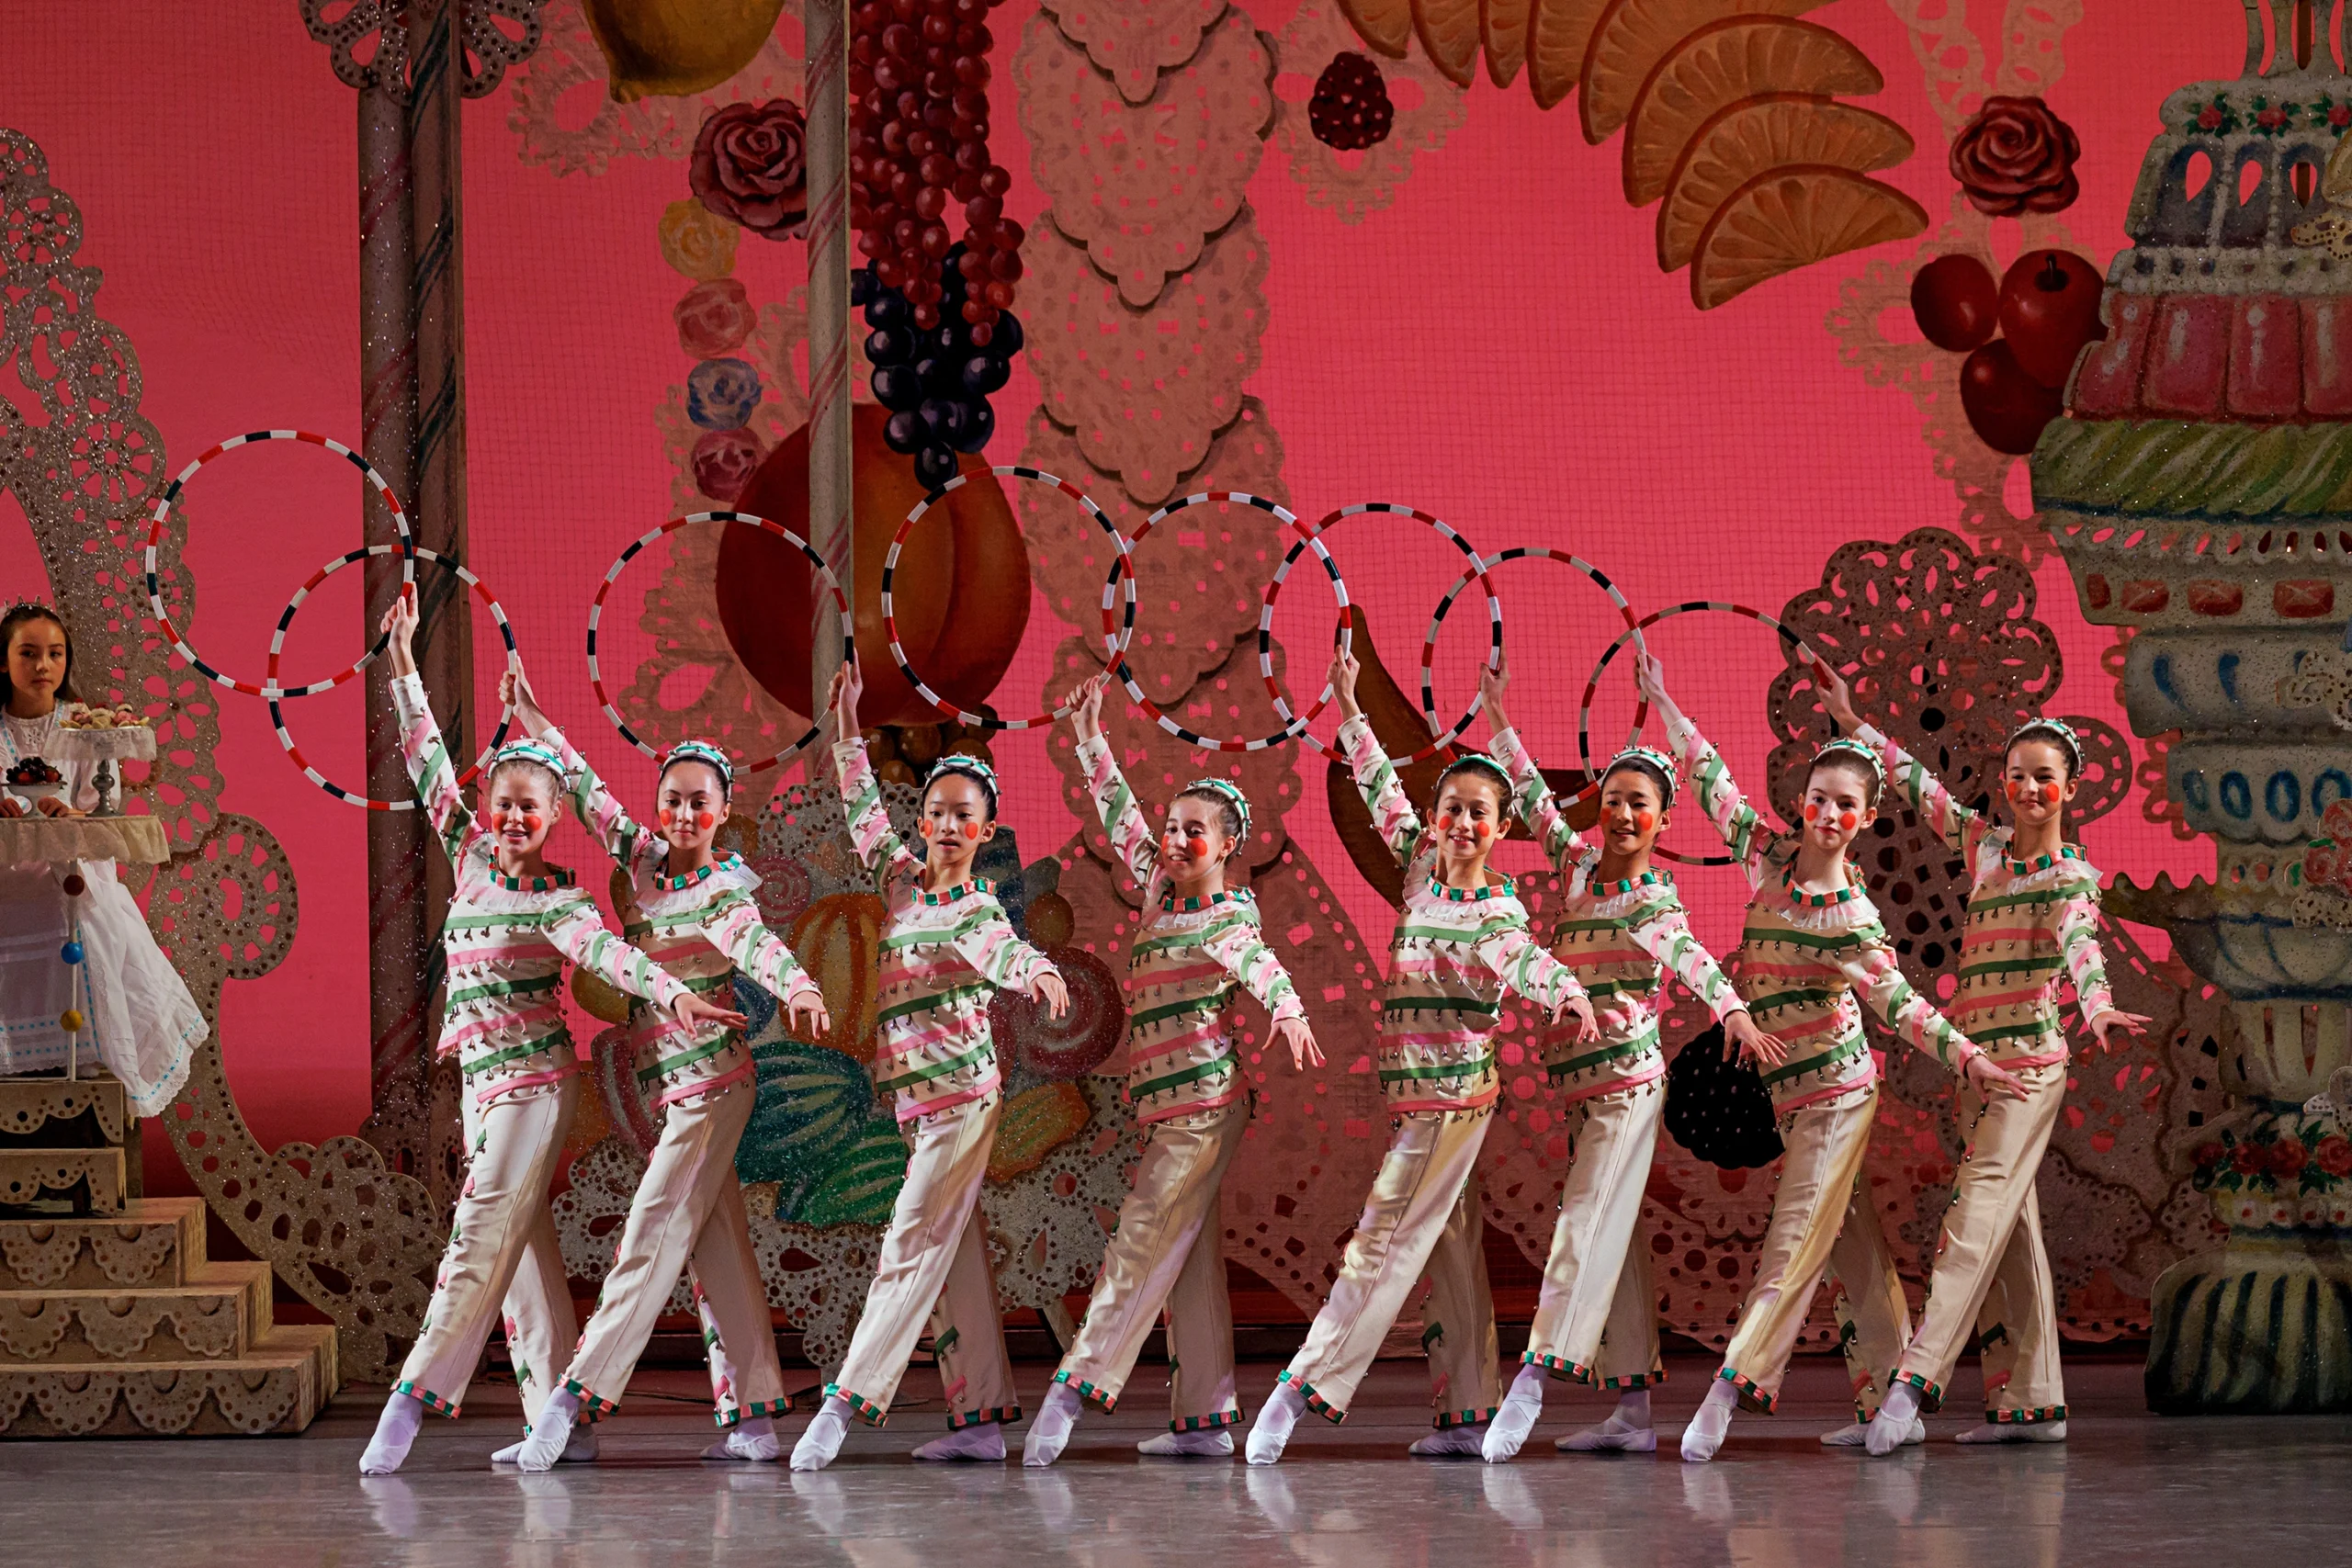 During a performance of The Nutcracker, a group of pre-teen female dancers stand in a line with their left leg in tendu devant croise. They wear costumes of white pants, tunics and caps with pink and green stripes and matching pom-pom embellishments. They wear red circles on their cheeks and hold a candy-cane striped hoop in their raised right hand. They poses in front of an elaborate set depicting a land of sweets, with tiers of candy and sugar.